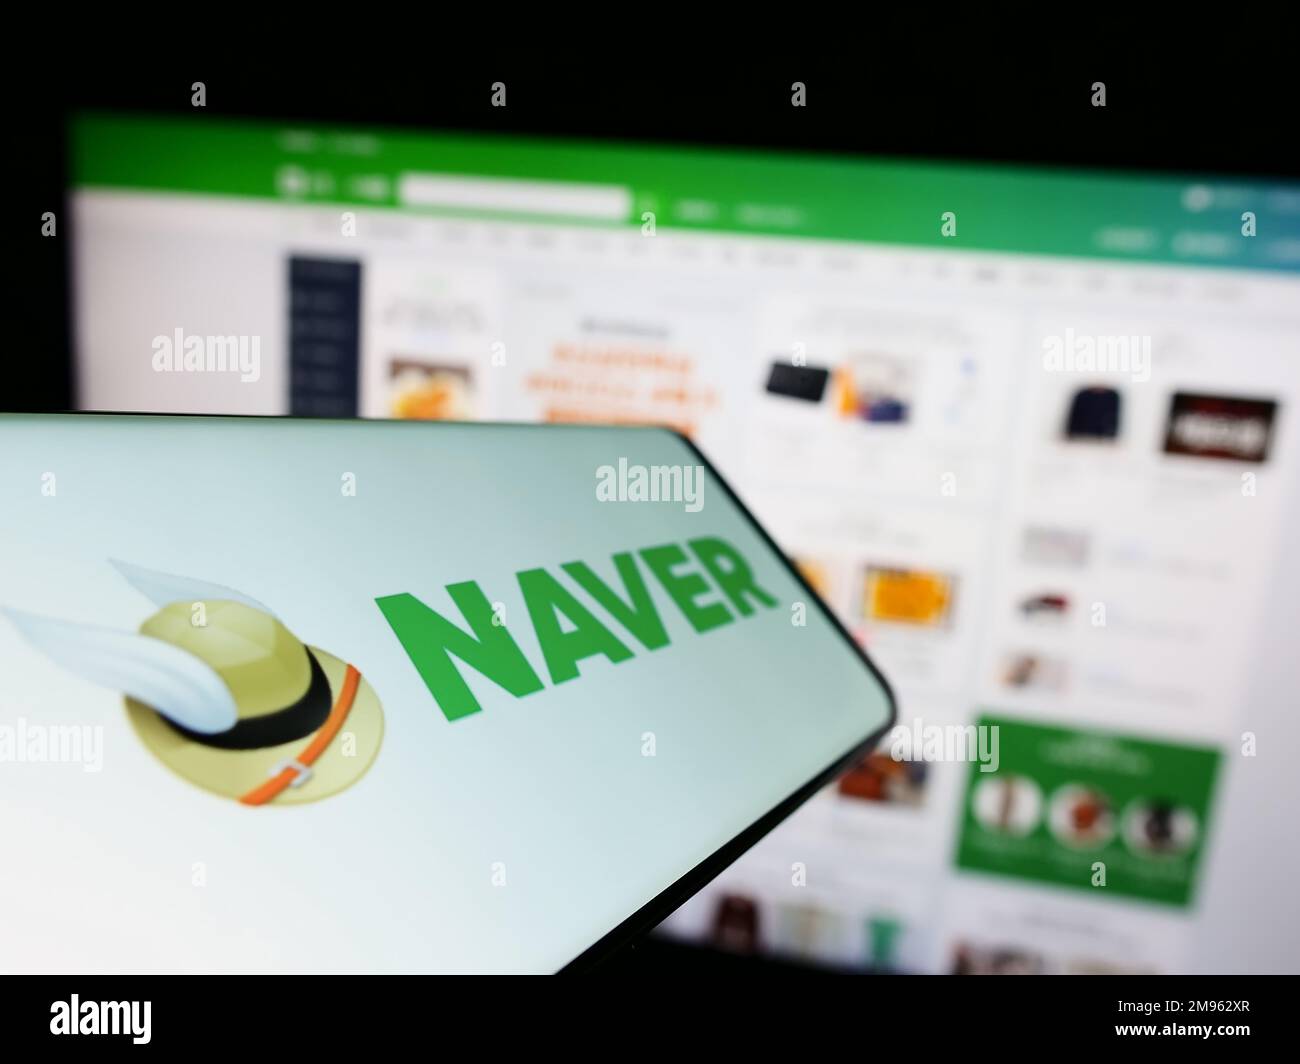 Cellphone with logo of search engine company Naver Corporation on screen in front of business website. Focus on center-left of phone display. Stock Photo